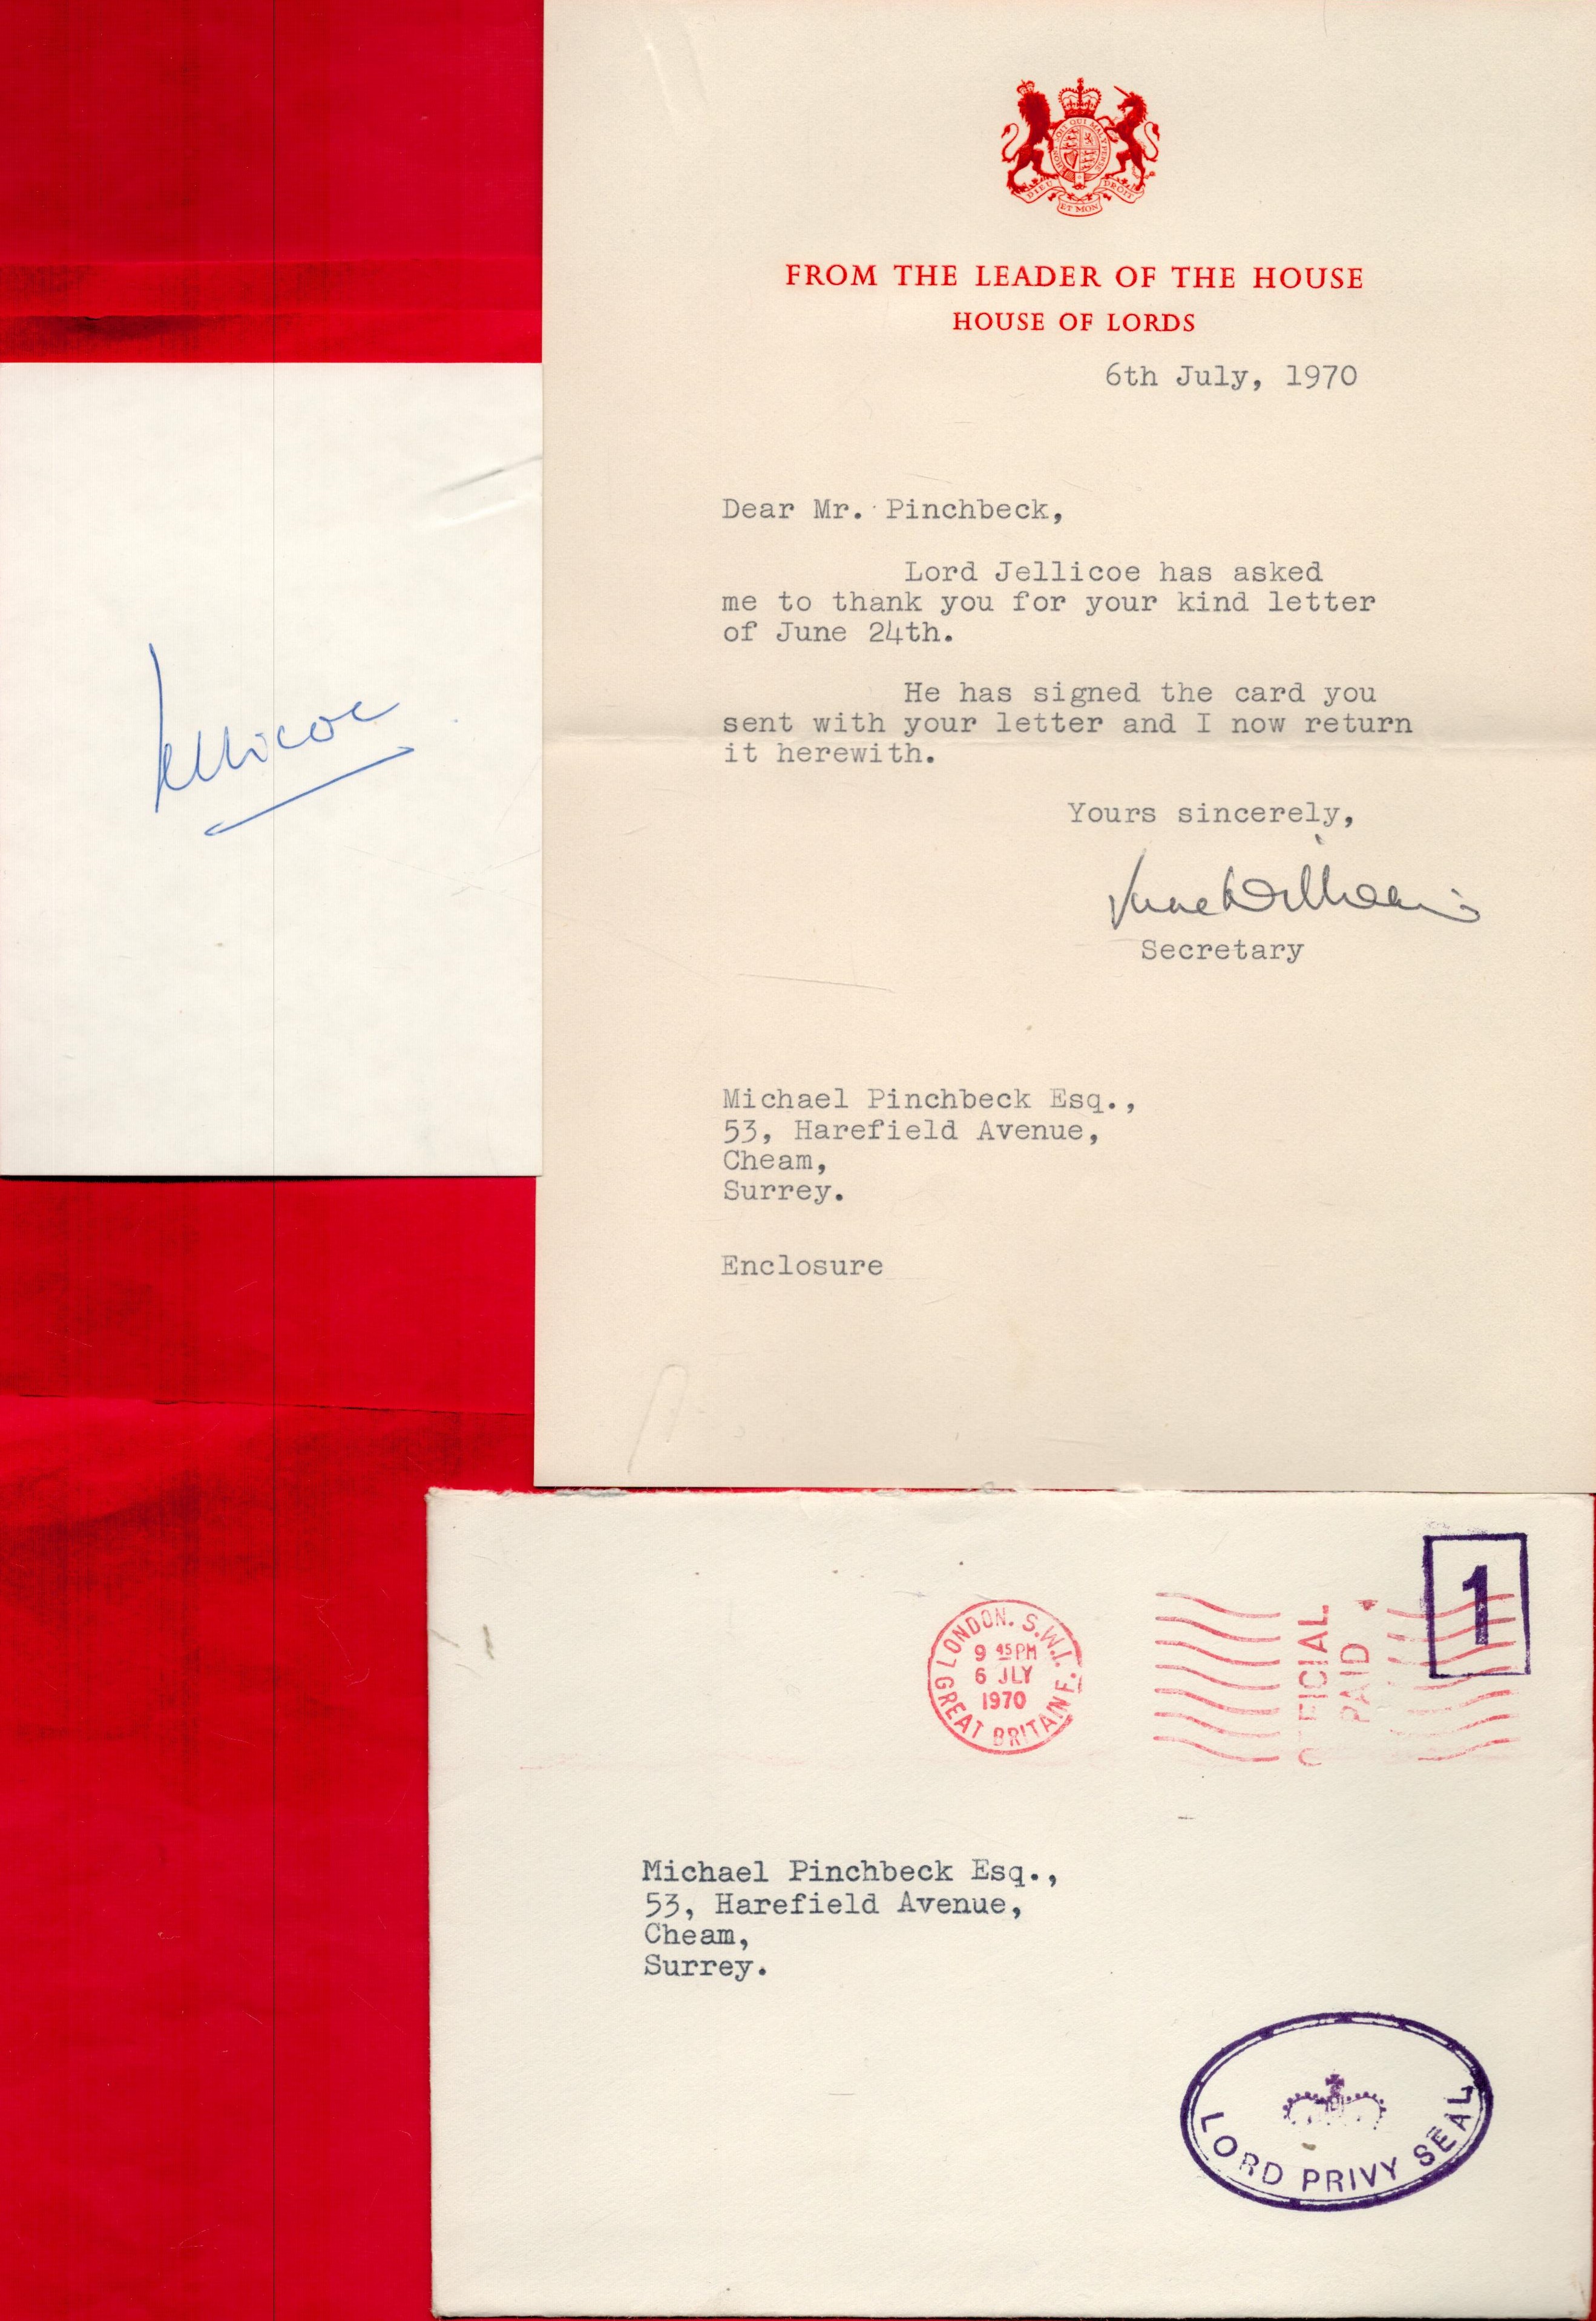 2nd Earl Jellicoe signed card with House of Lords typed letter from secretary and original mailing